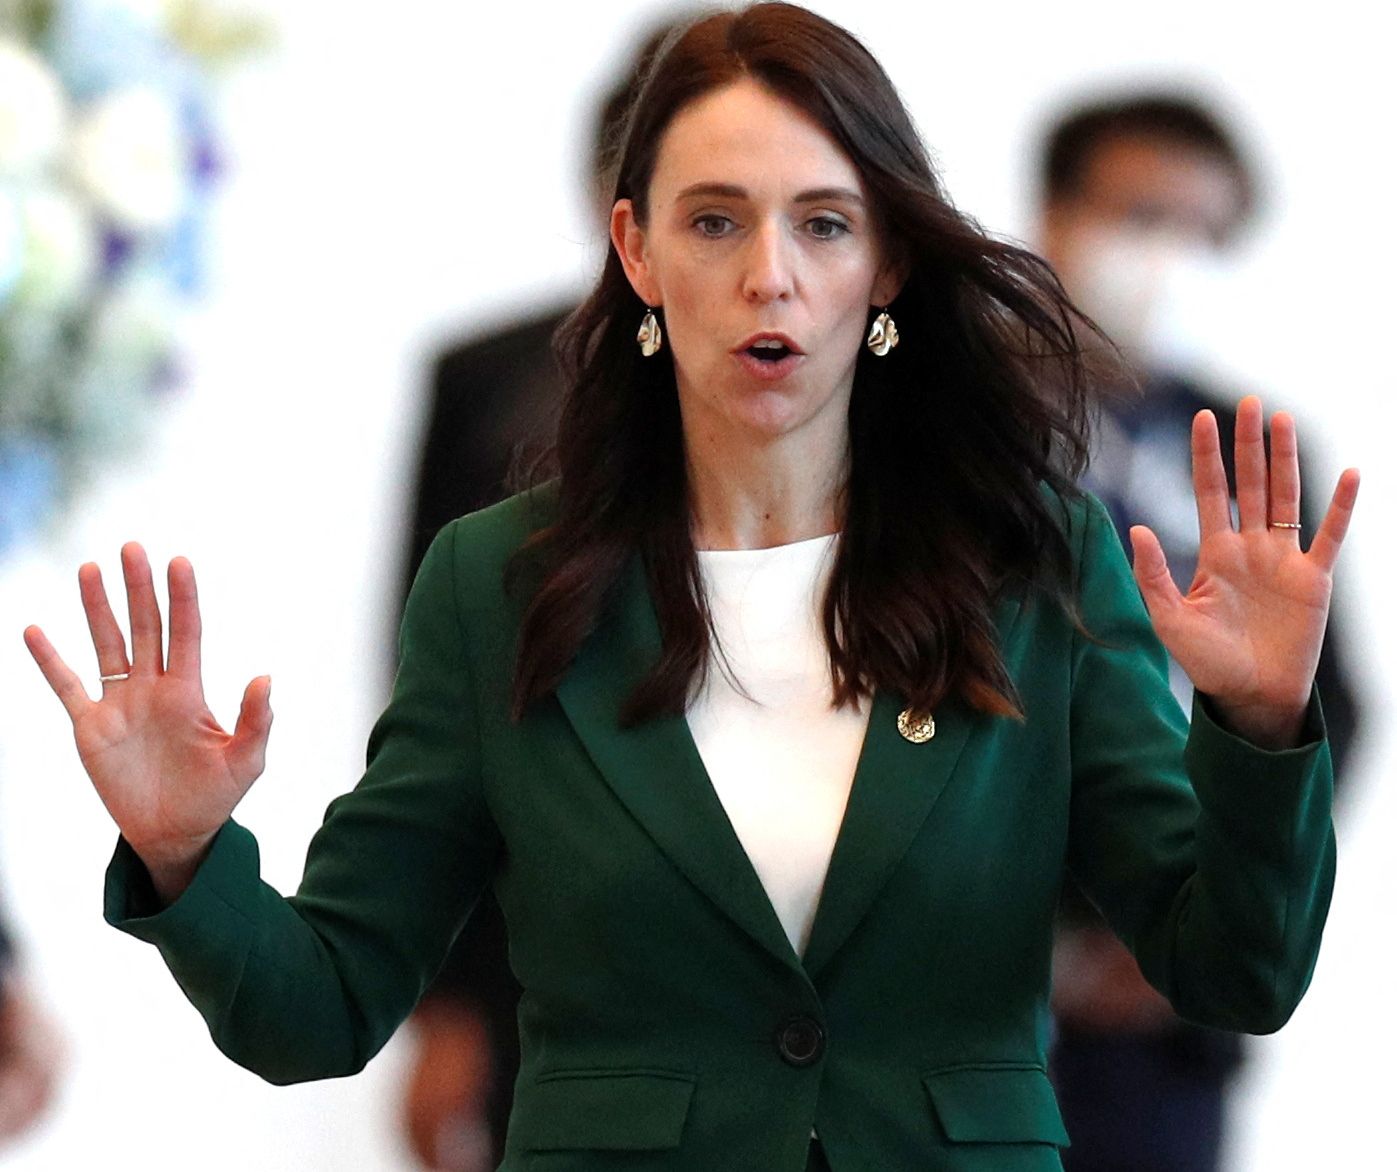 New Zealand Prime Minister Jacinda Ardern gestures as she attends the 29th APEC Economic Leaders? Meeting (AELM) during the APEC 2022 in Bangkok, Thailand, 18 November 2022. Thailand hosts the Asia-Pacific Economic Cooperation or APEC 2022, the summit for economic cooperation comprising 21 leading member economies to promote free trade in the Asia-Pacific region. Rungroj Yongrit/Pool via REUTERS